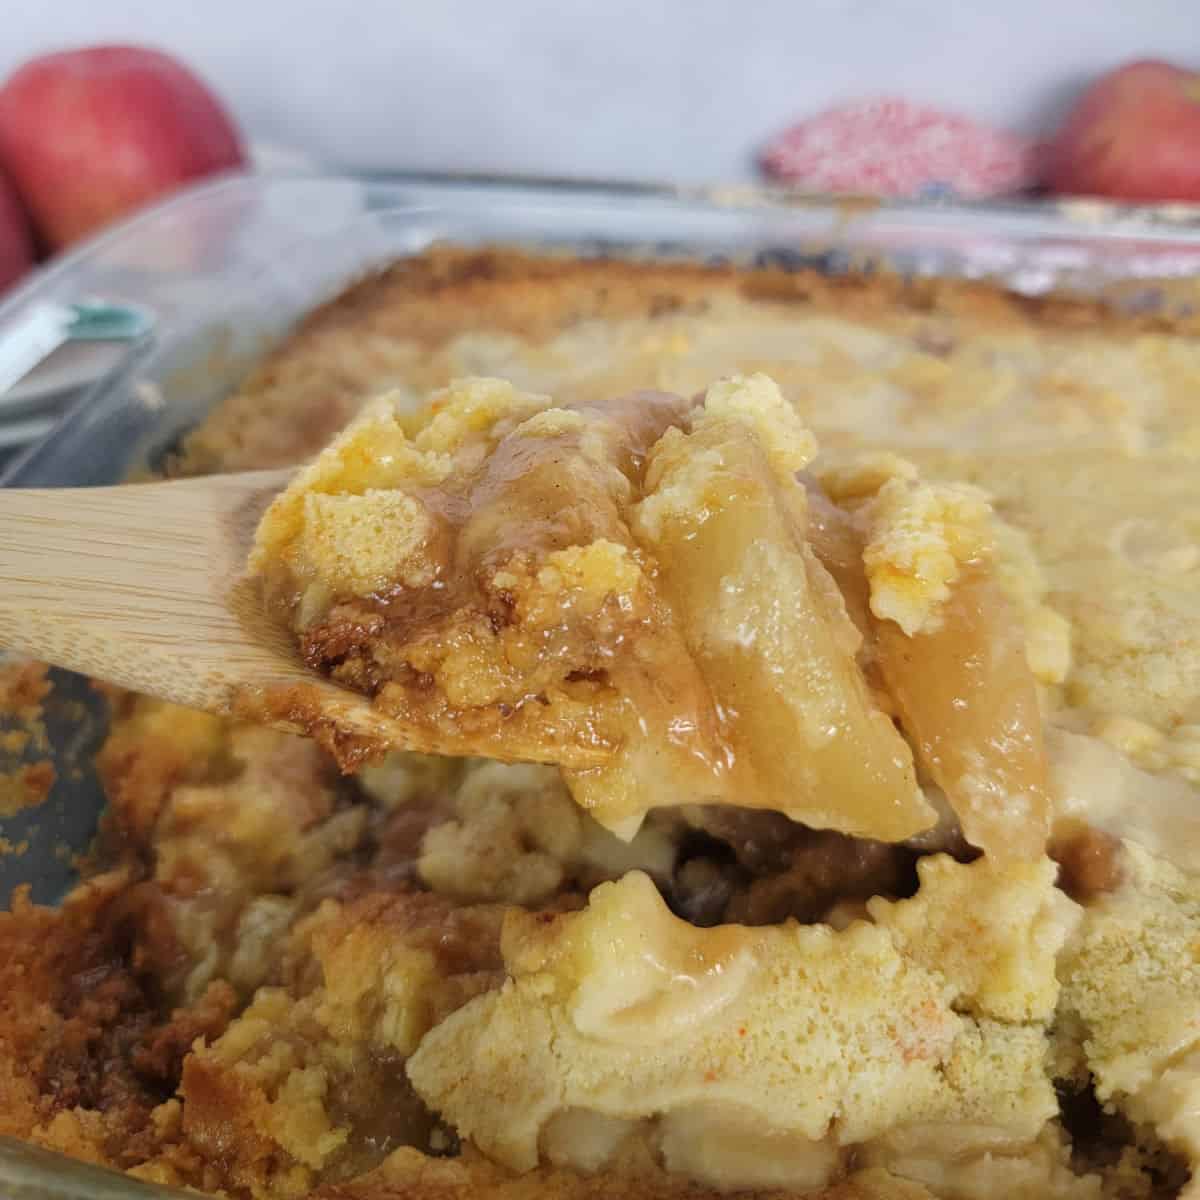 Wooden Spoon scooping Caramel Apple Dump Cake from a glass pan